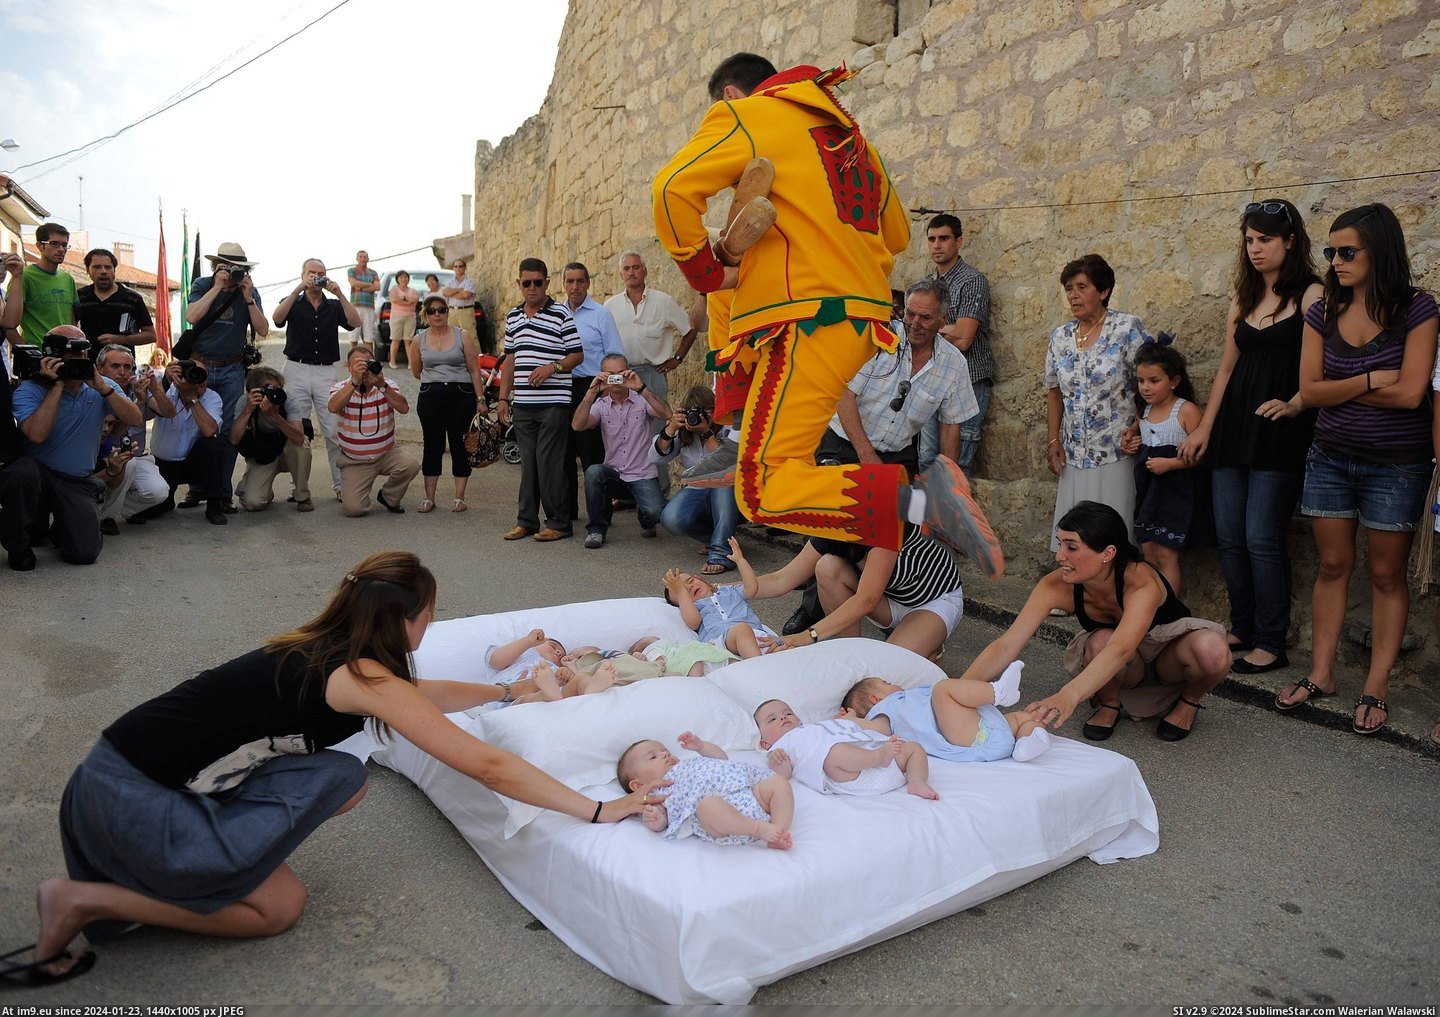 #Wtf #Baby #Festival #Spain #Jumping [Wtf] Baby Jumping Festival in Spain Pic. (Bild von album My r/WTF favs))